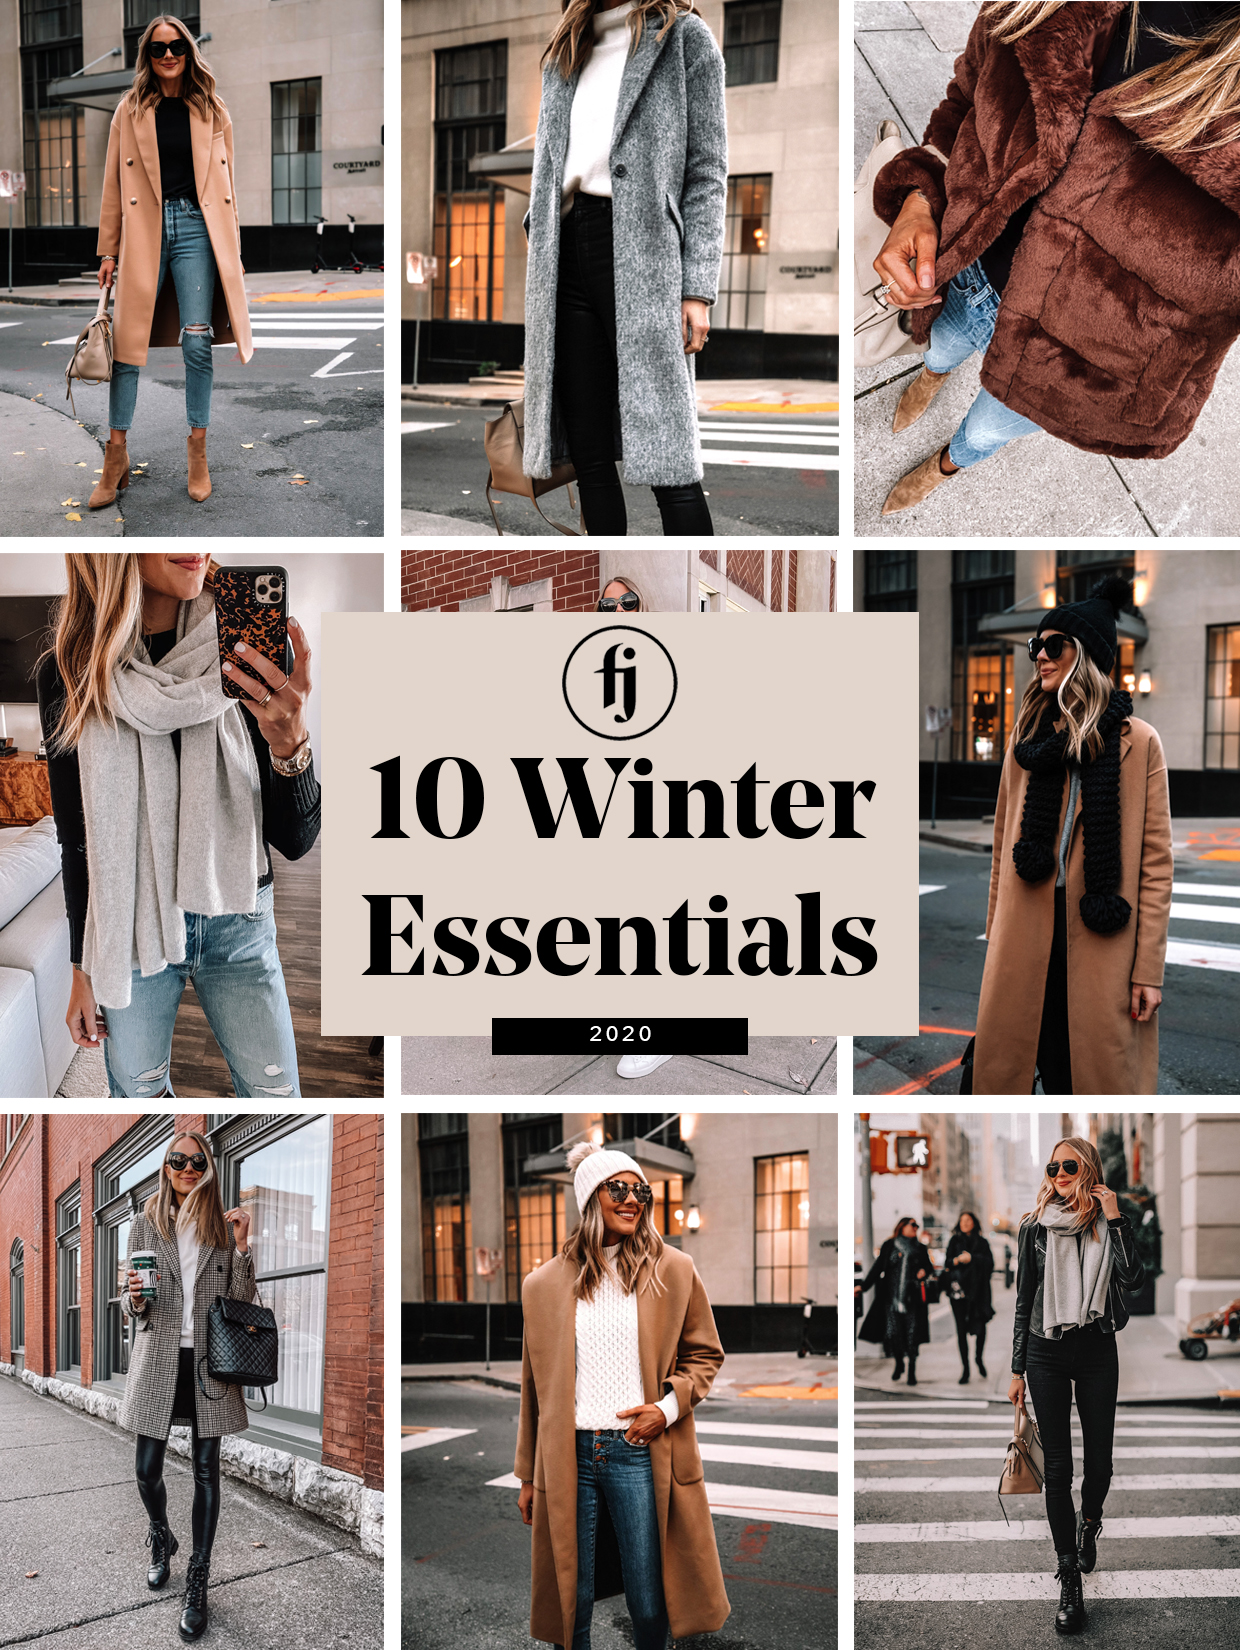 5 of the Best Winter Basic Fashion Items to Buy Now